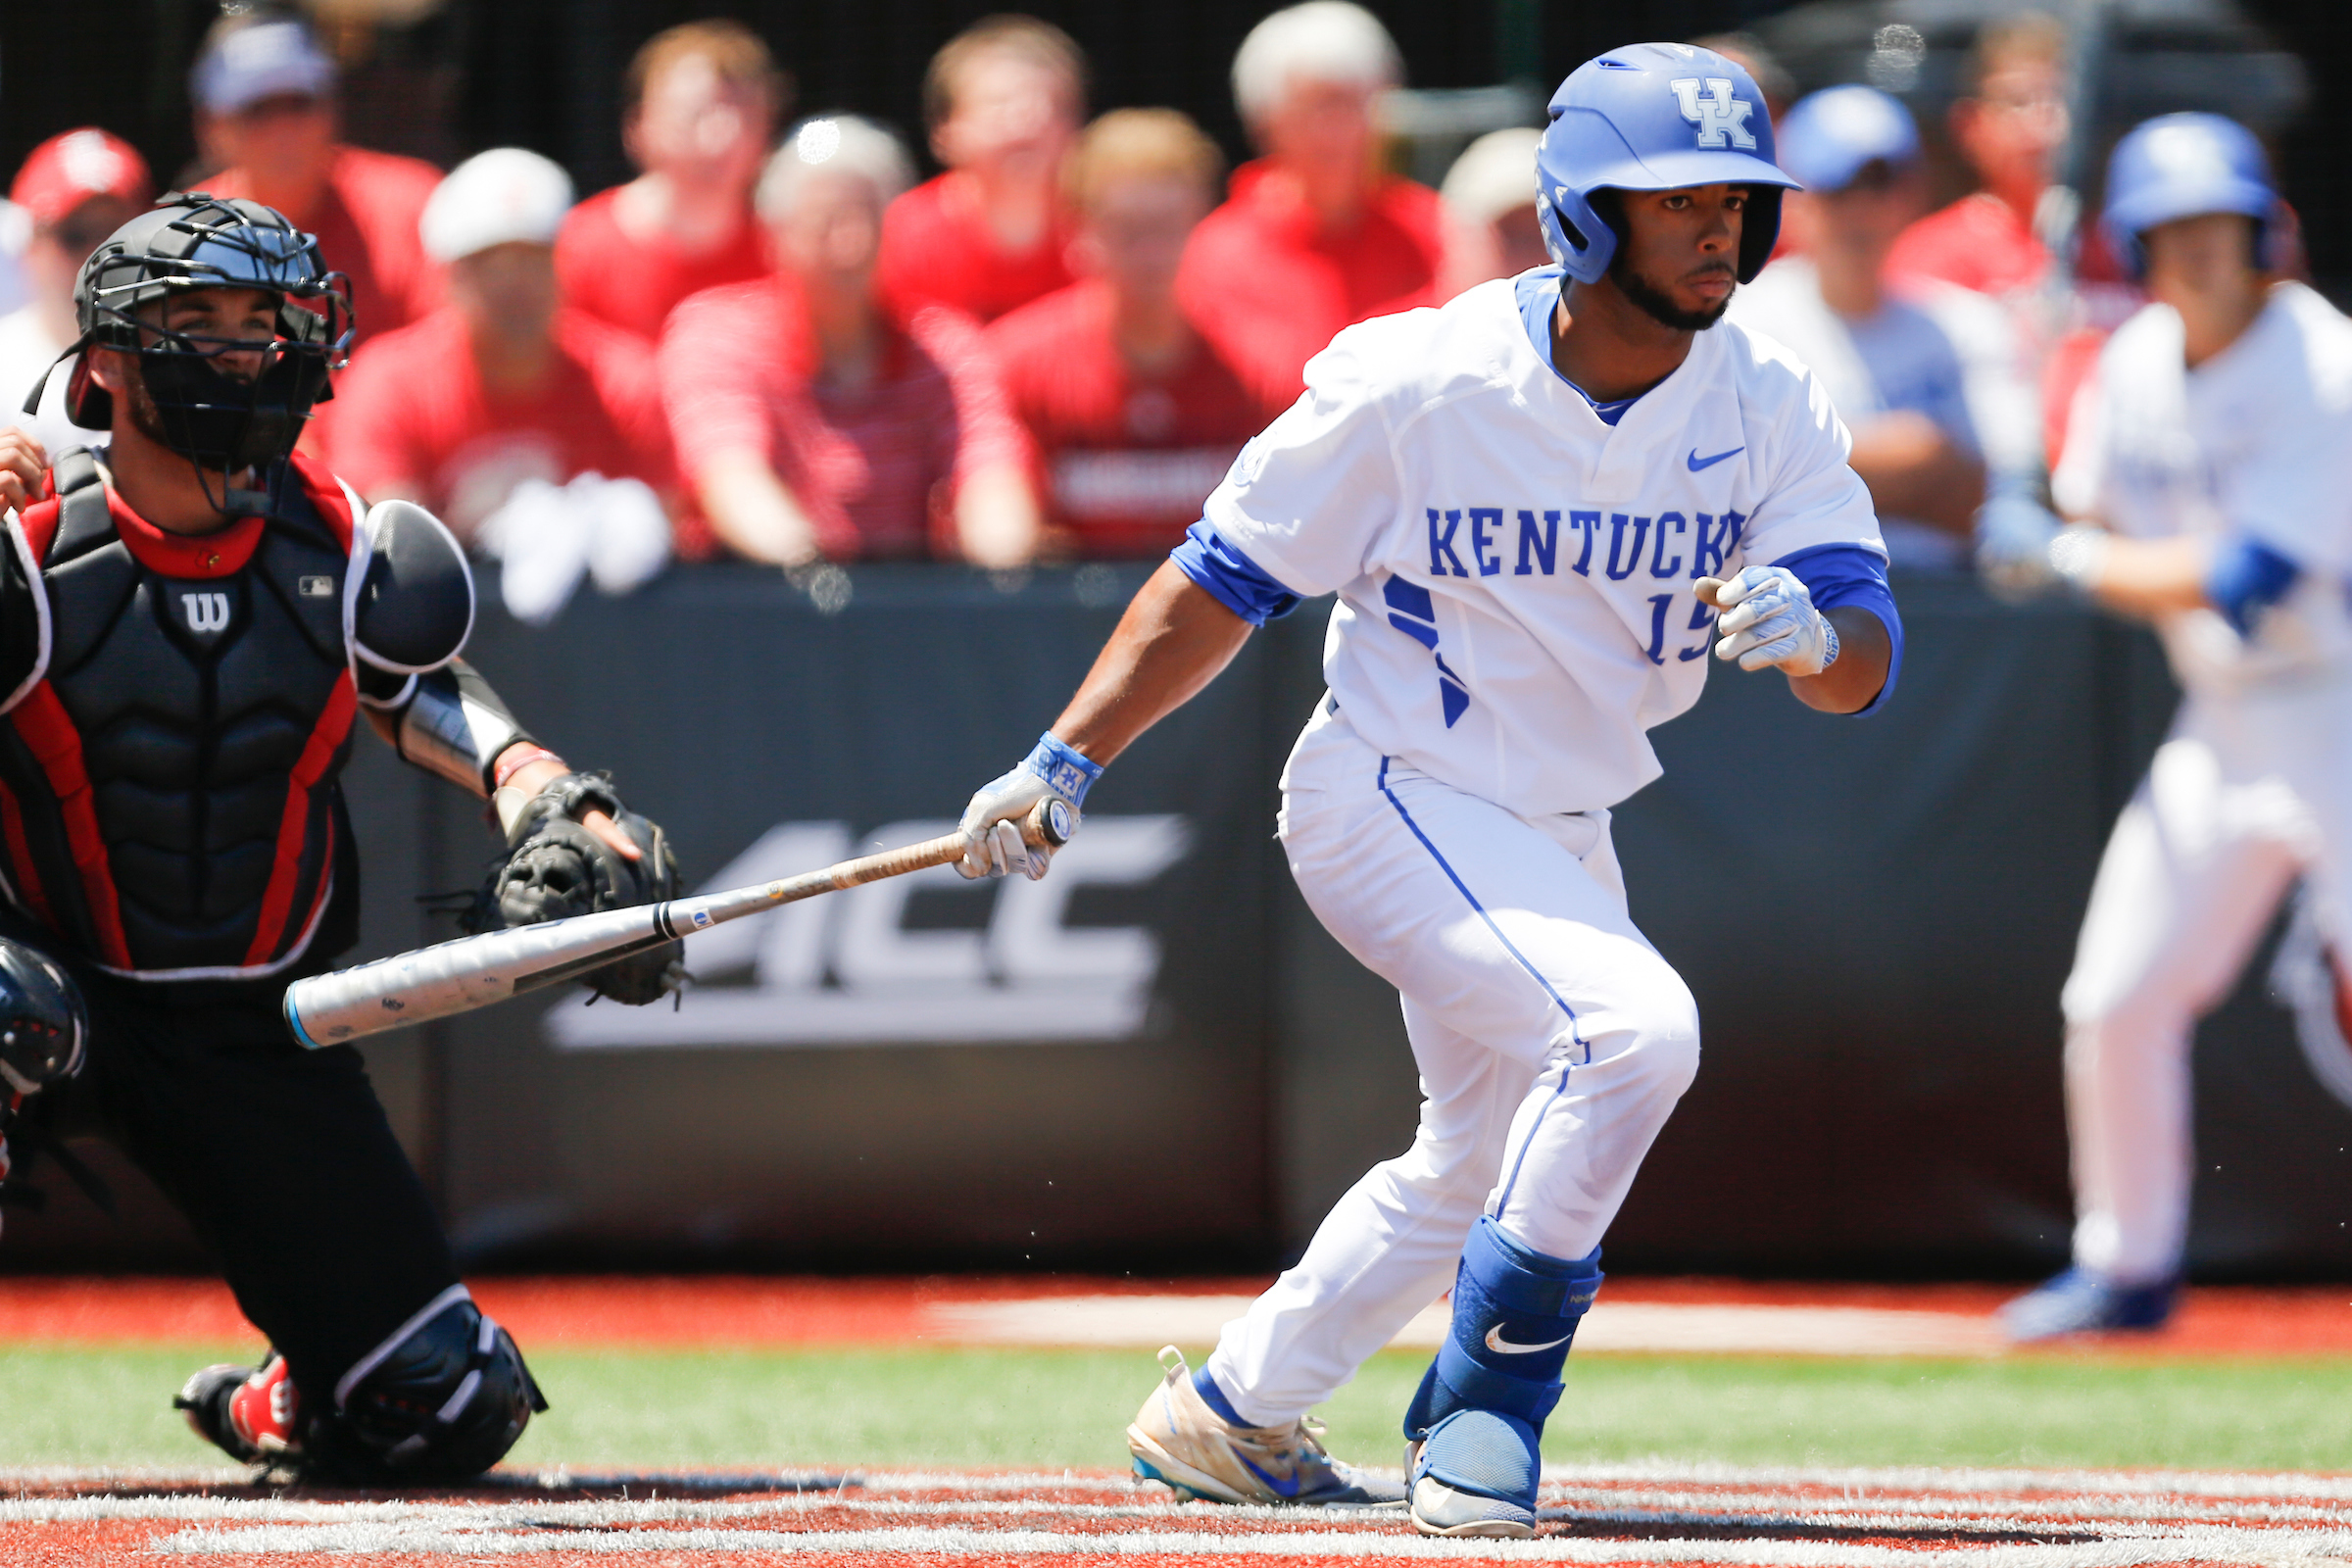 Kentucky’s Historic Season Comes to an End in Super Regional